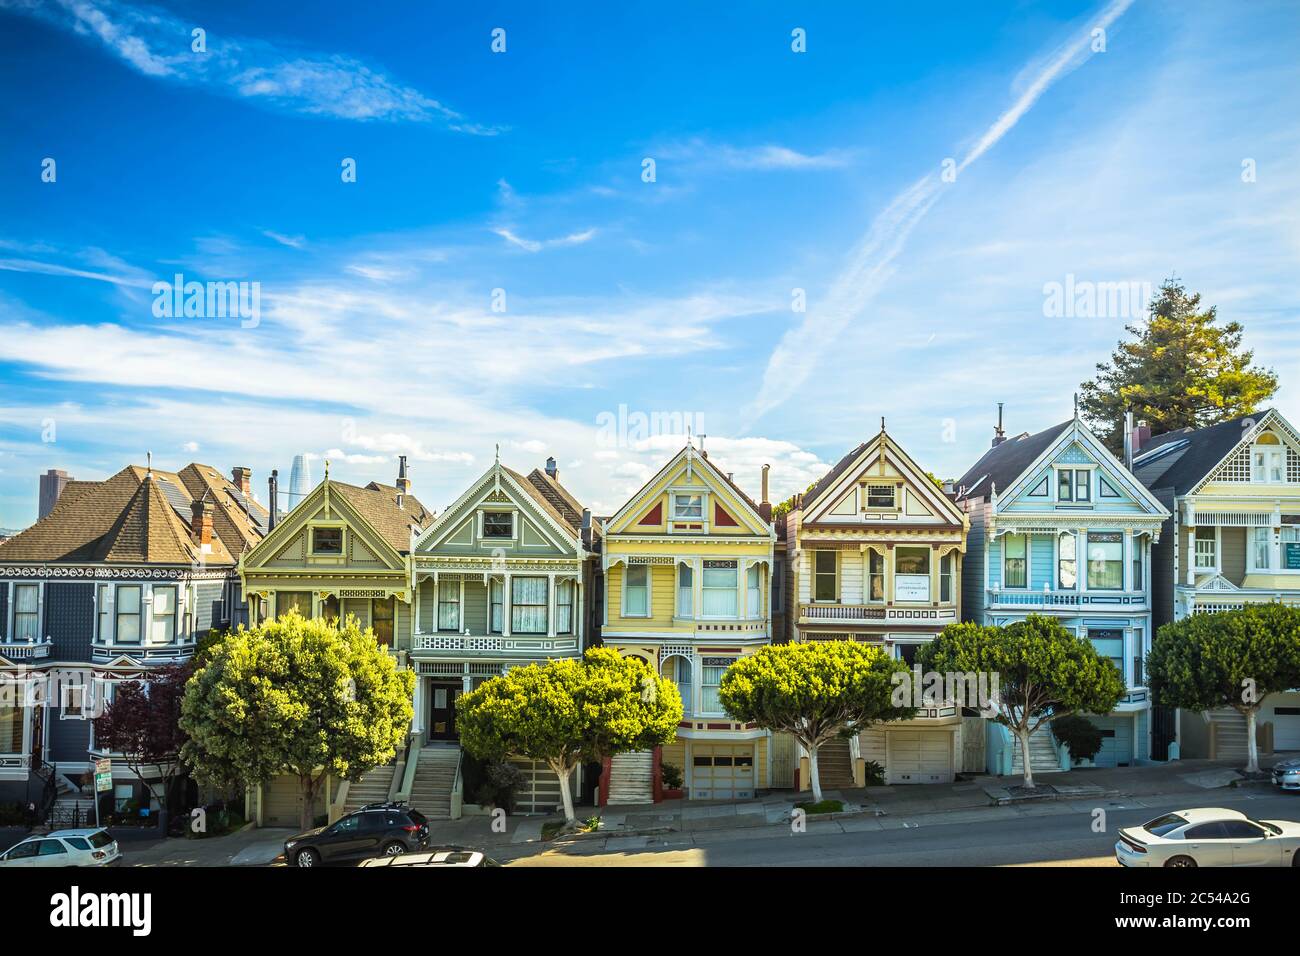 The famous row of Victorian Era houses in San Francisco known as the Painted Ladies on a sunny Spring day Stock Photo